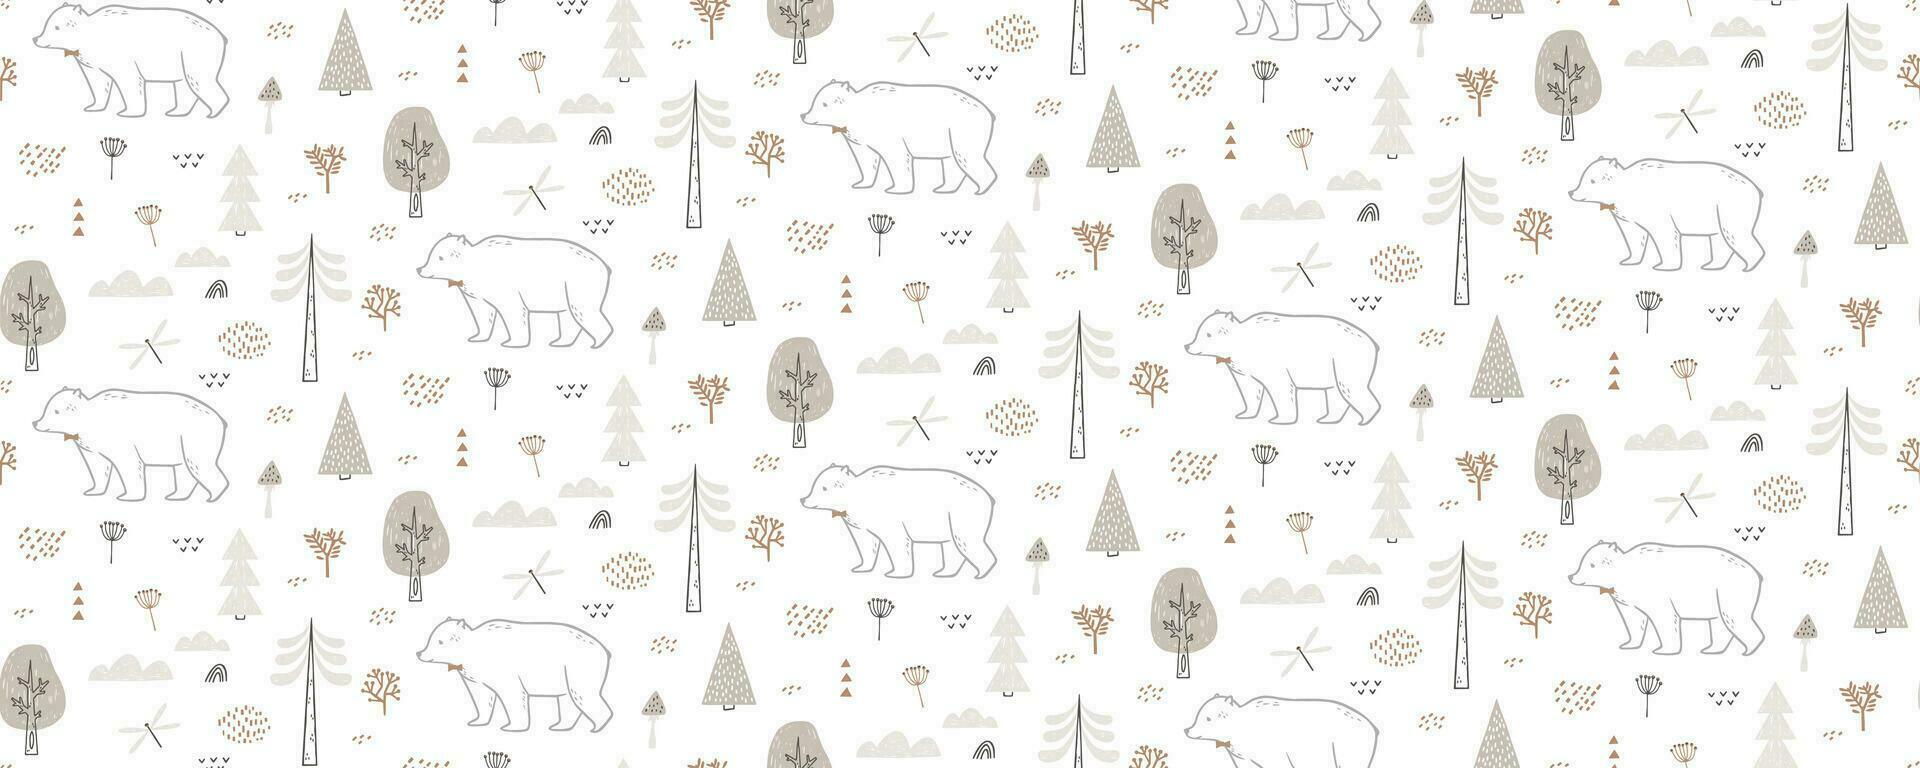 Seamless pattern with bear, dragonfly, clouds, trees. Hand drawn forest pattern is endlessly repeating. Can be used for kids, covers, fabrics, wallpapers, home decor. Vector illustration